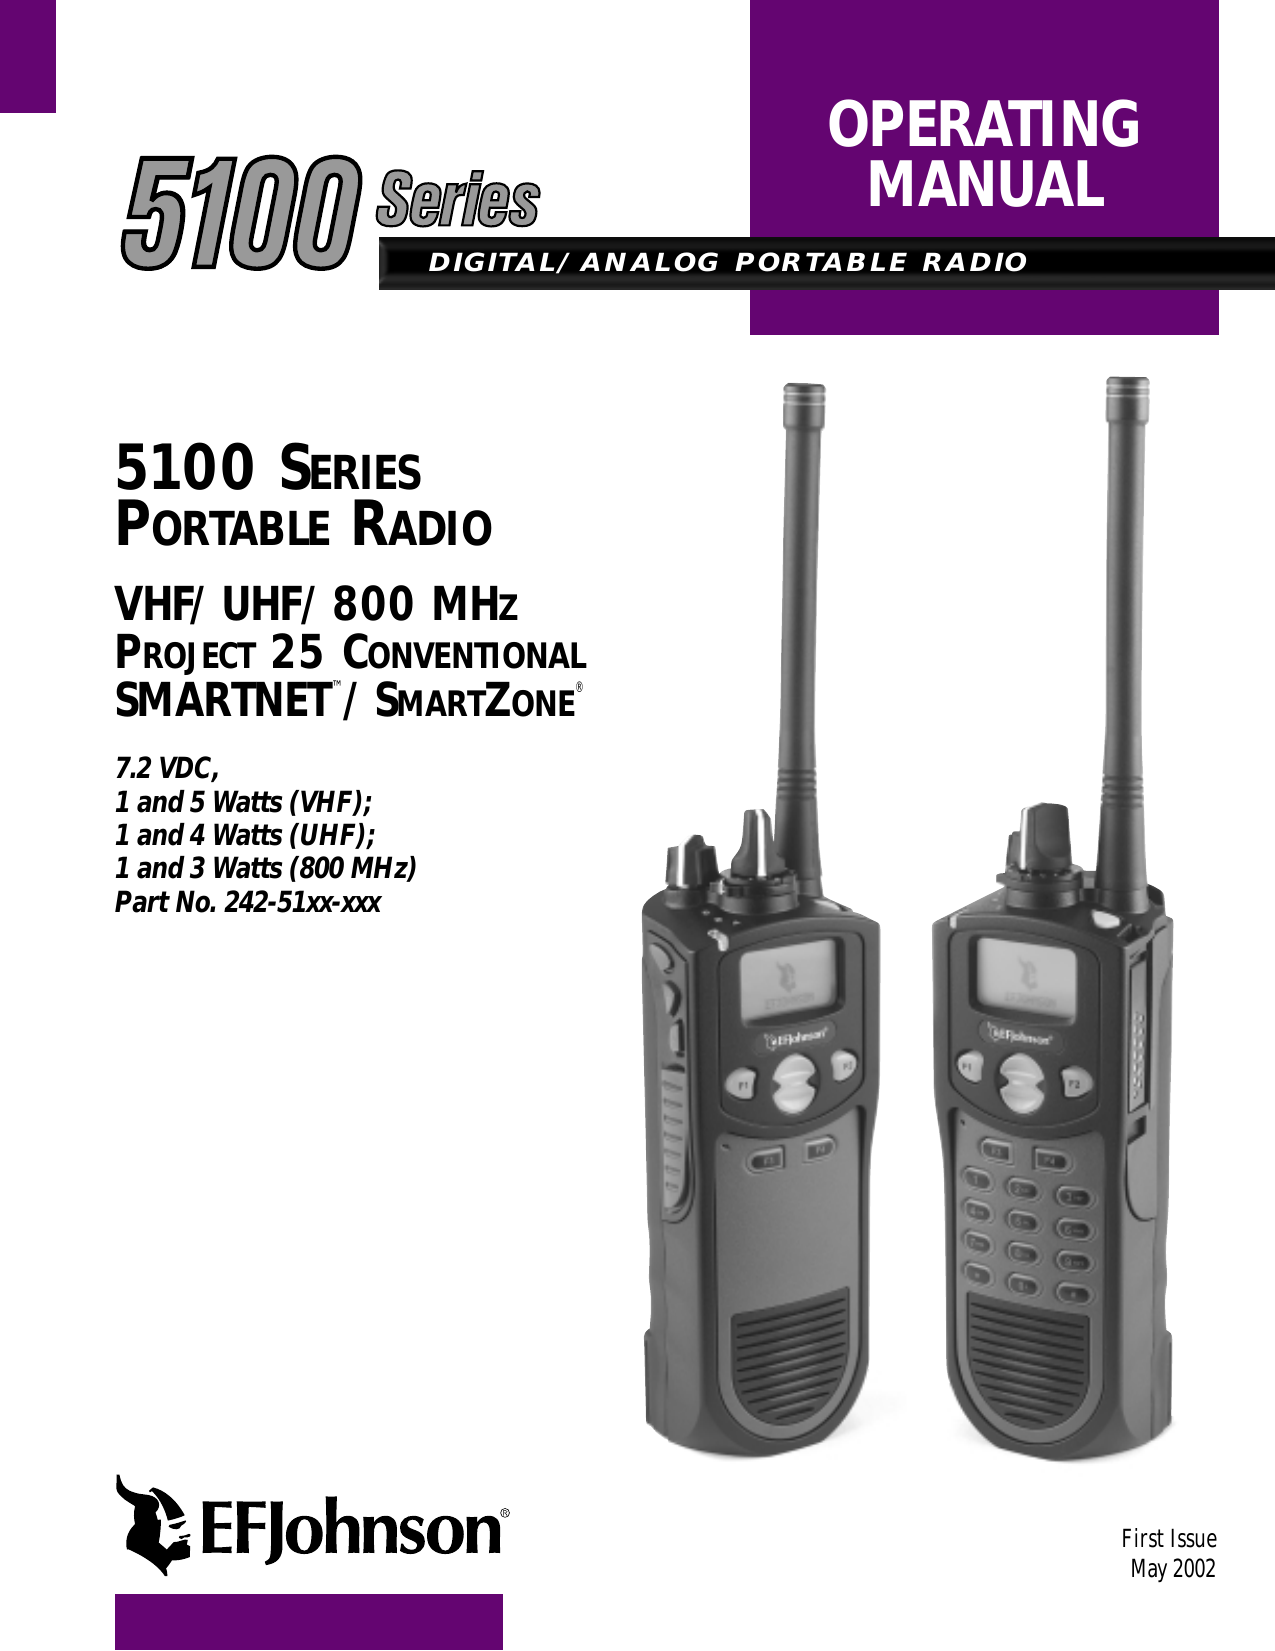 DIGITAL/ANALOG PORTABLE RADIOOPERATINGMANUAL5100 SERIESPORTABLE RADIOVHF/UHF/800 MHZPROJECT 25 CONVENTIONALSMARTNET™/SMARTZONE®7.2 VDC, 1 and 5 Watts (VHF);1 and 4 Watts (UHF);1 and 3 Watts (800 MHz) Part No. 242-51xx-xxxFirst IssueMay 2002Supersedes: Part No. 